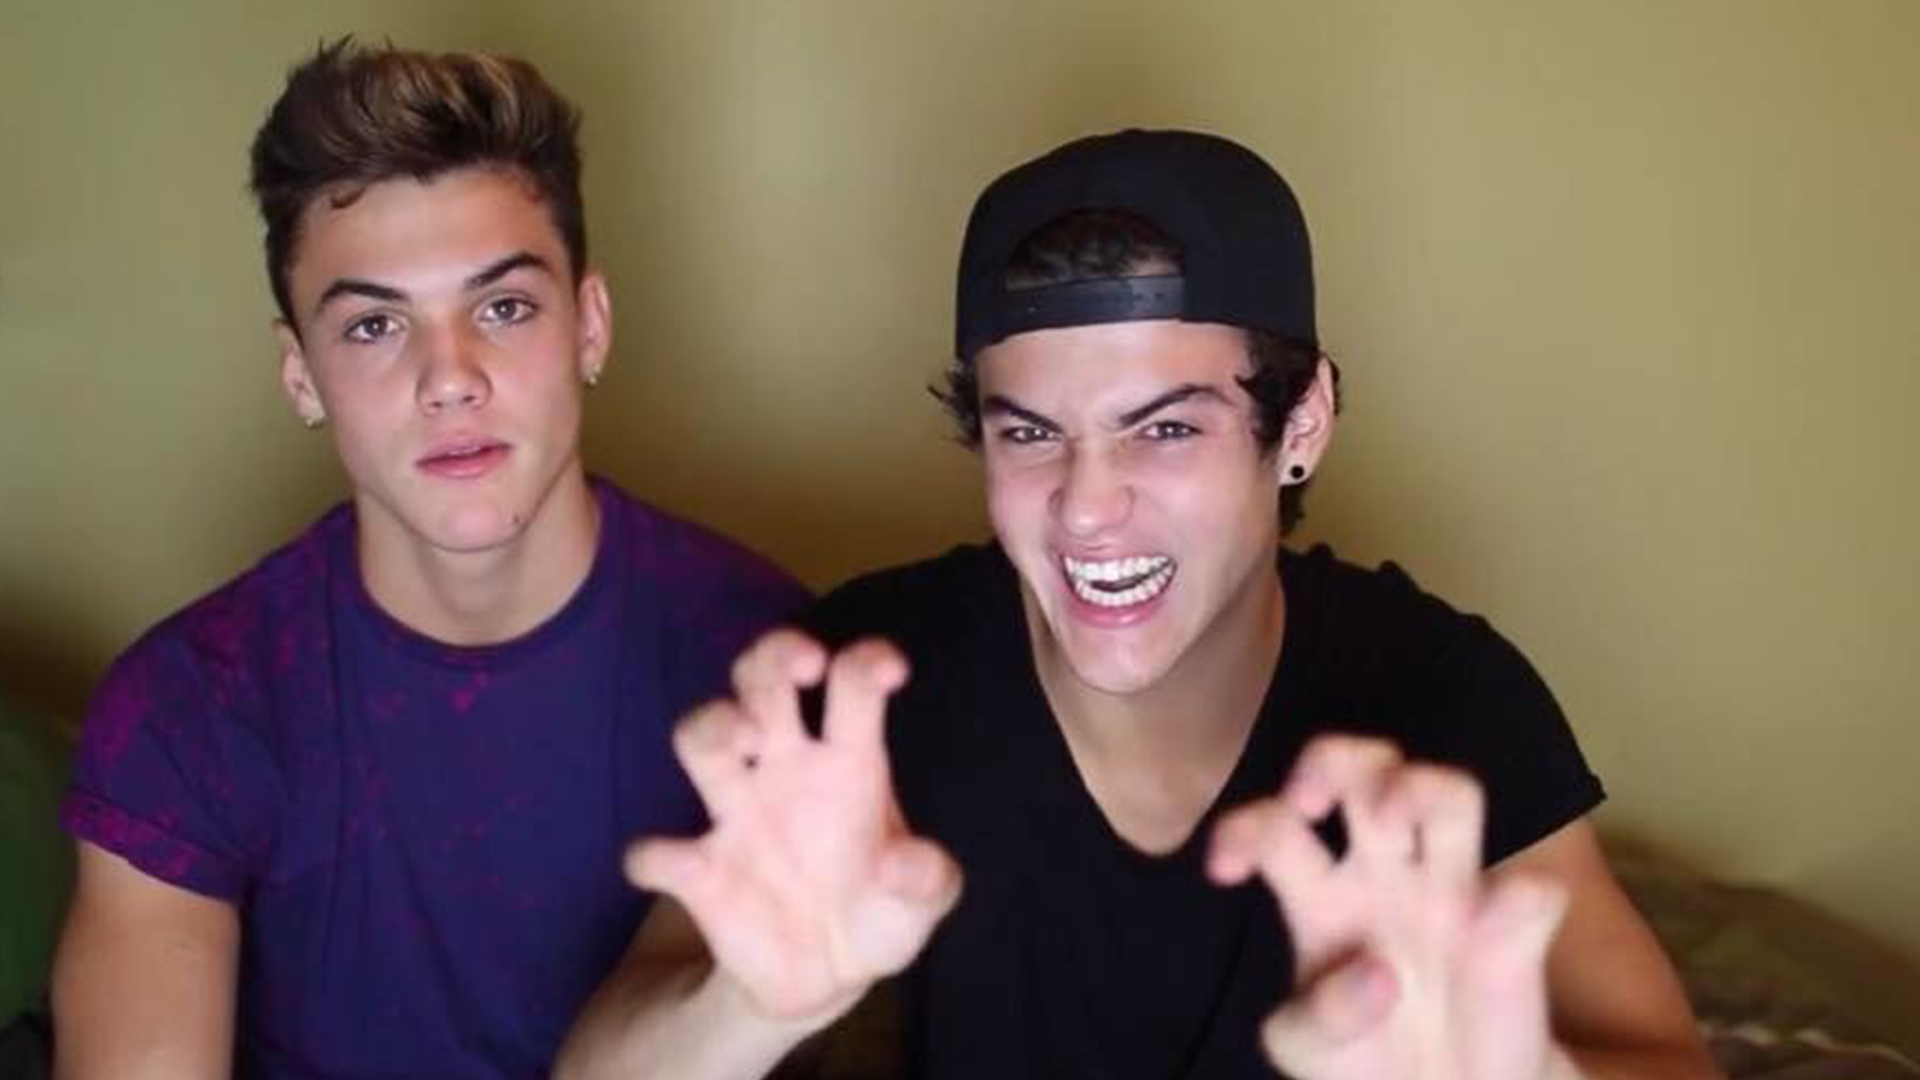 Top 15 Dolan Twins Facts You Never Knew | Beano.com